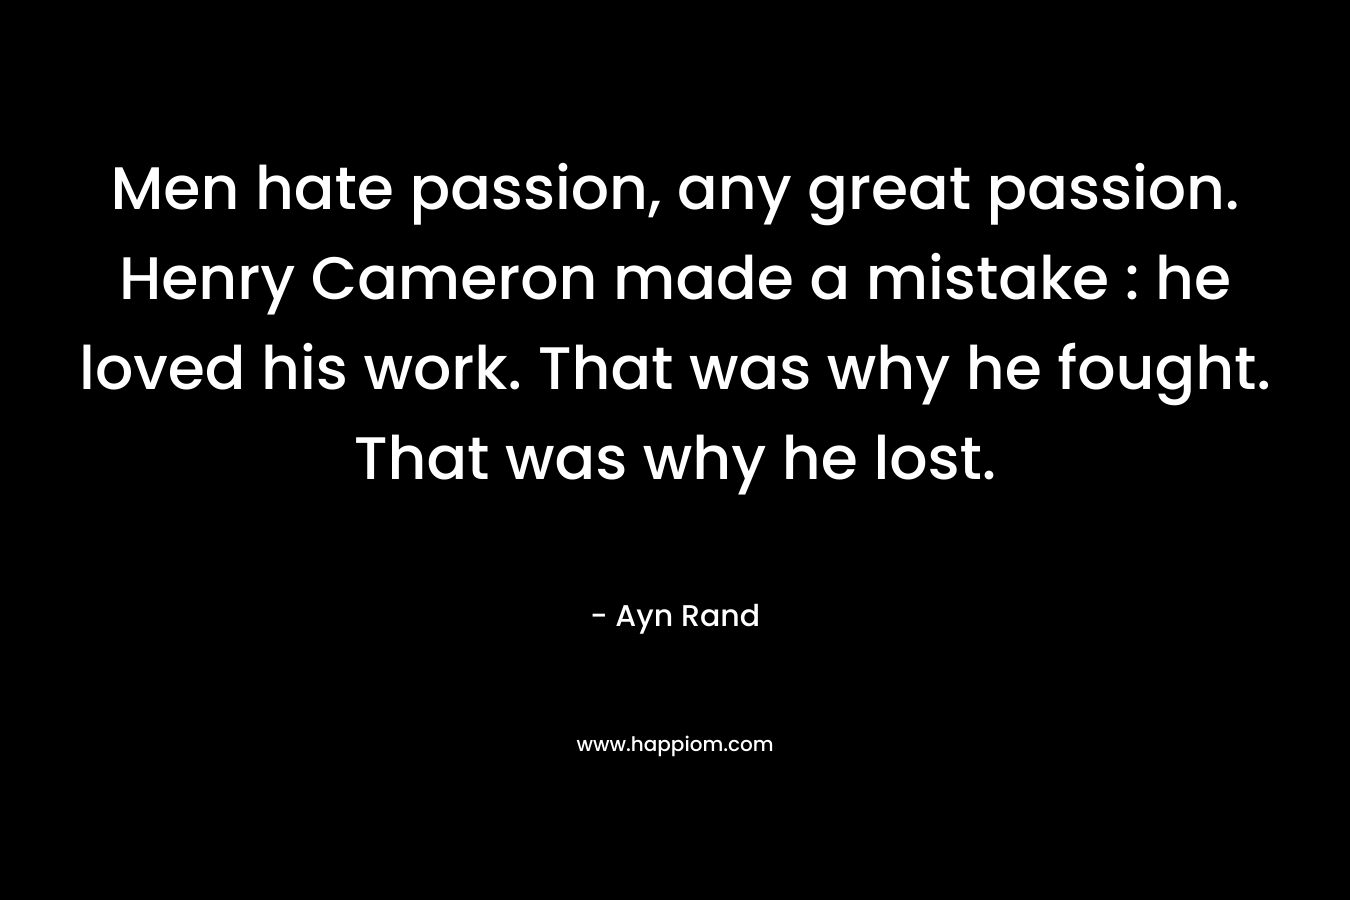 Men hate passion, any great passion. Henry Cameron made a mistake : he loved his work. That was why he fought. That was why he lost.